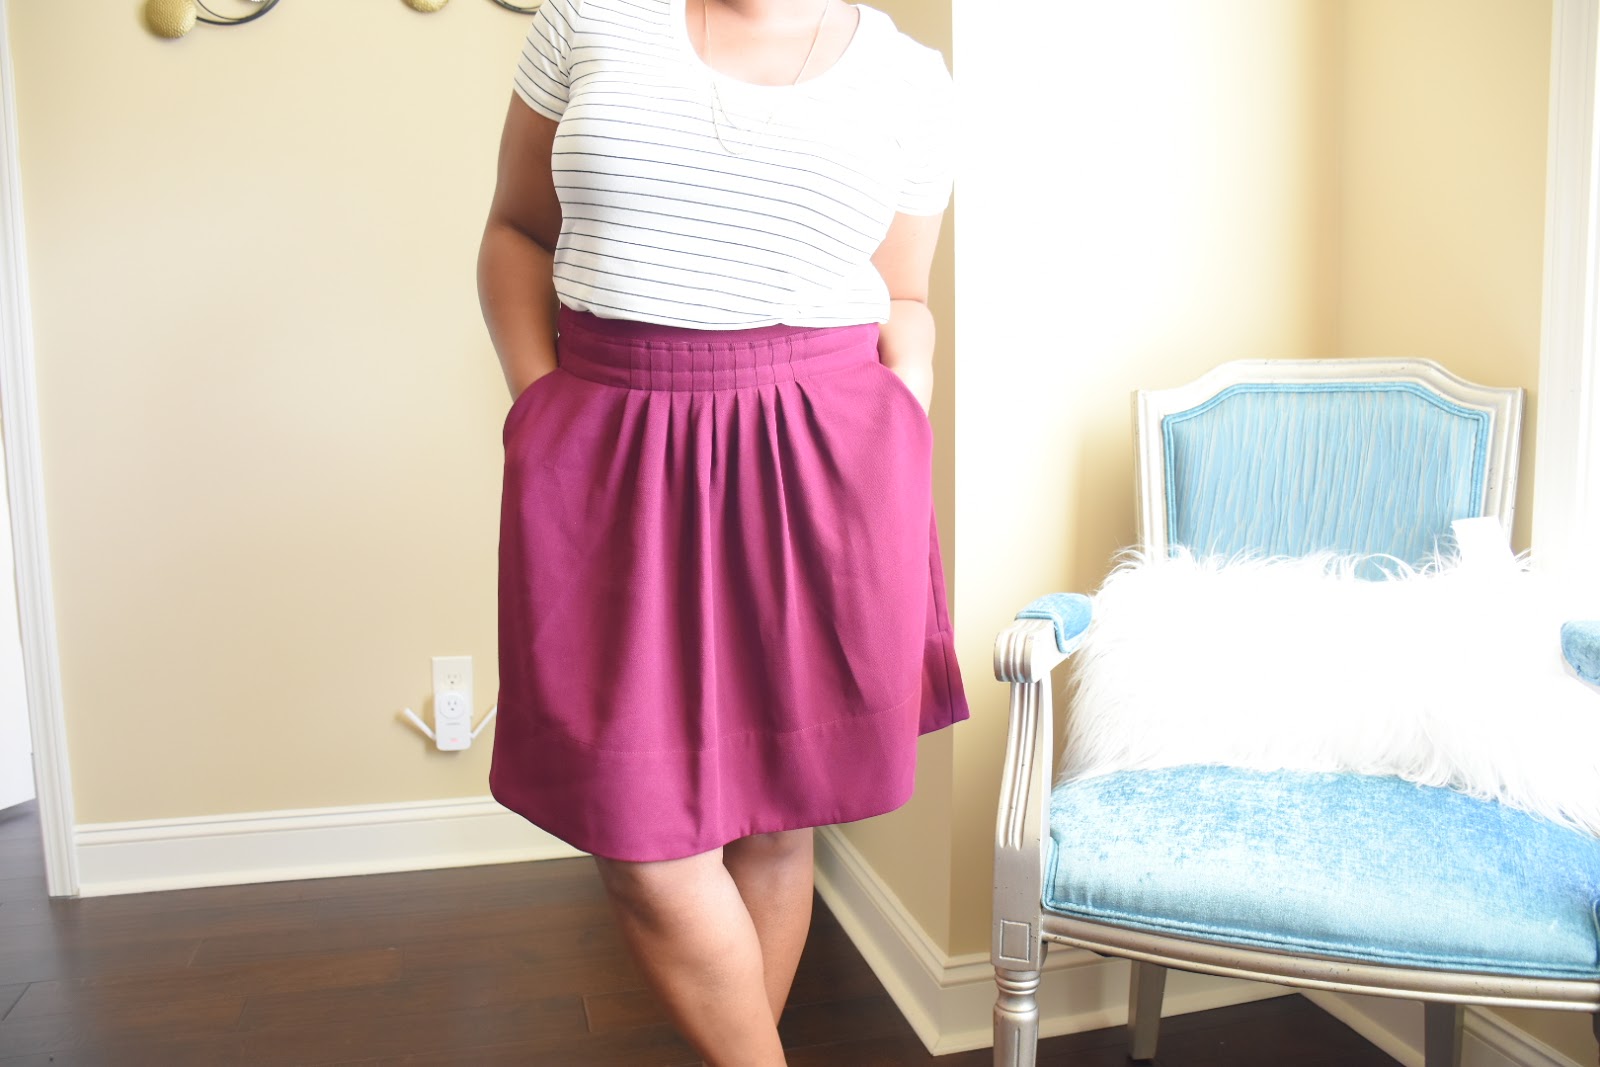 Mini Target Fall Clothes Haul: See What I Got  via  www.productreviewmom.com